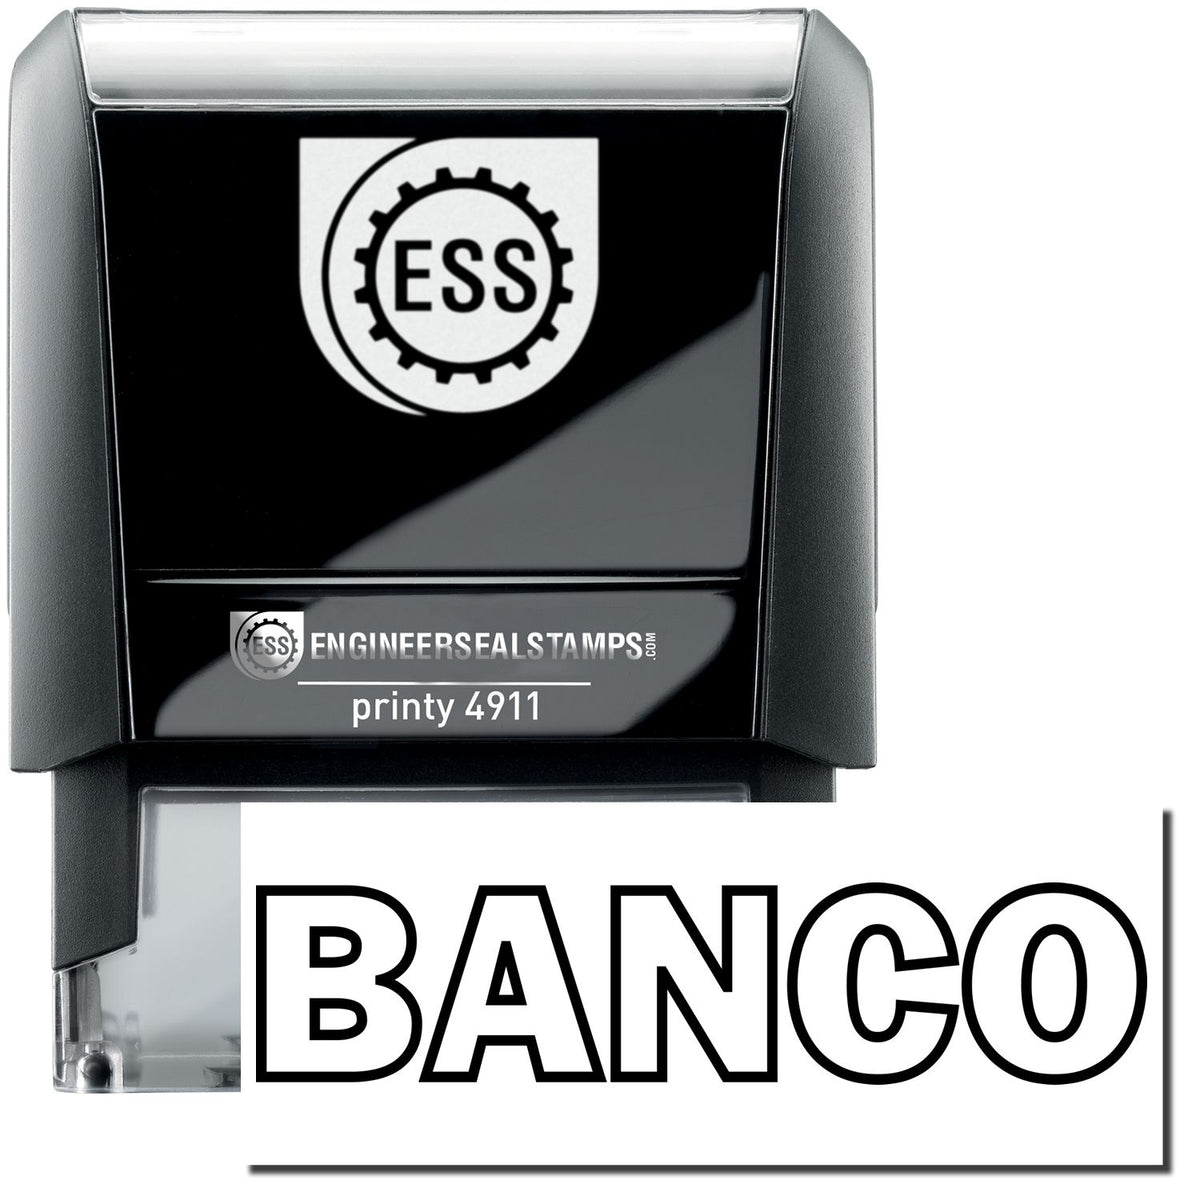 A self-inking stamp with a stamped image showing how the text &quot;BANCO&quot; in an outline style is displayed after stamping.